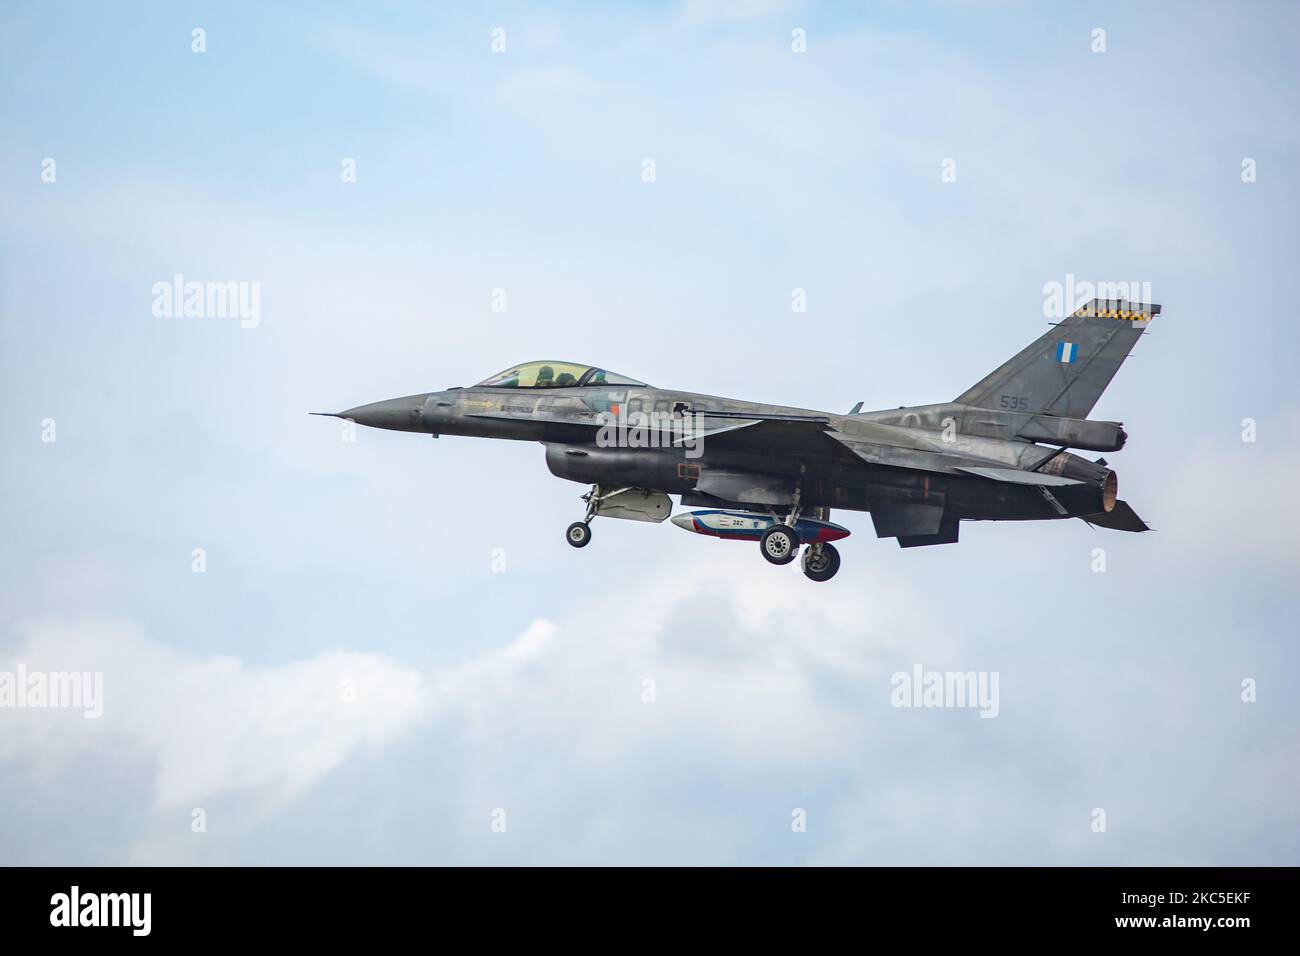 An F-16 Fighting Falcon or Viper, a multirole fighter jet aircraft of the Hellenic Air Force HAF ( Greek ) as seen landing at Kleine Brogel Air Base EBBL in Belgium. F16 variants are produced in the United States of America by General Dynamics and Lockheed Martin. The specific fighter jet belongs to HAF 340 Mira Squadron, 115 Combat Wing – Souda Air Base in Crete Island in Greece and is an F-16C/D Block 52+ The military airplane is part of the display team taking place in the Belgian airports during air shows in September 2019. (Photo by Nicolas Economou/NurPhoto) Stock Photo